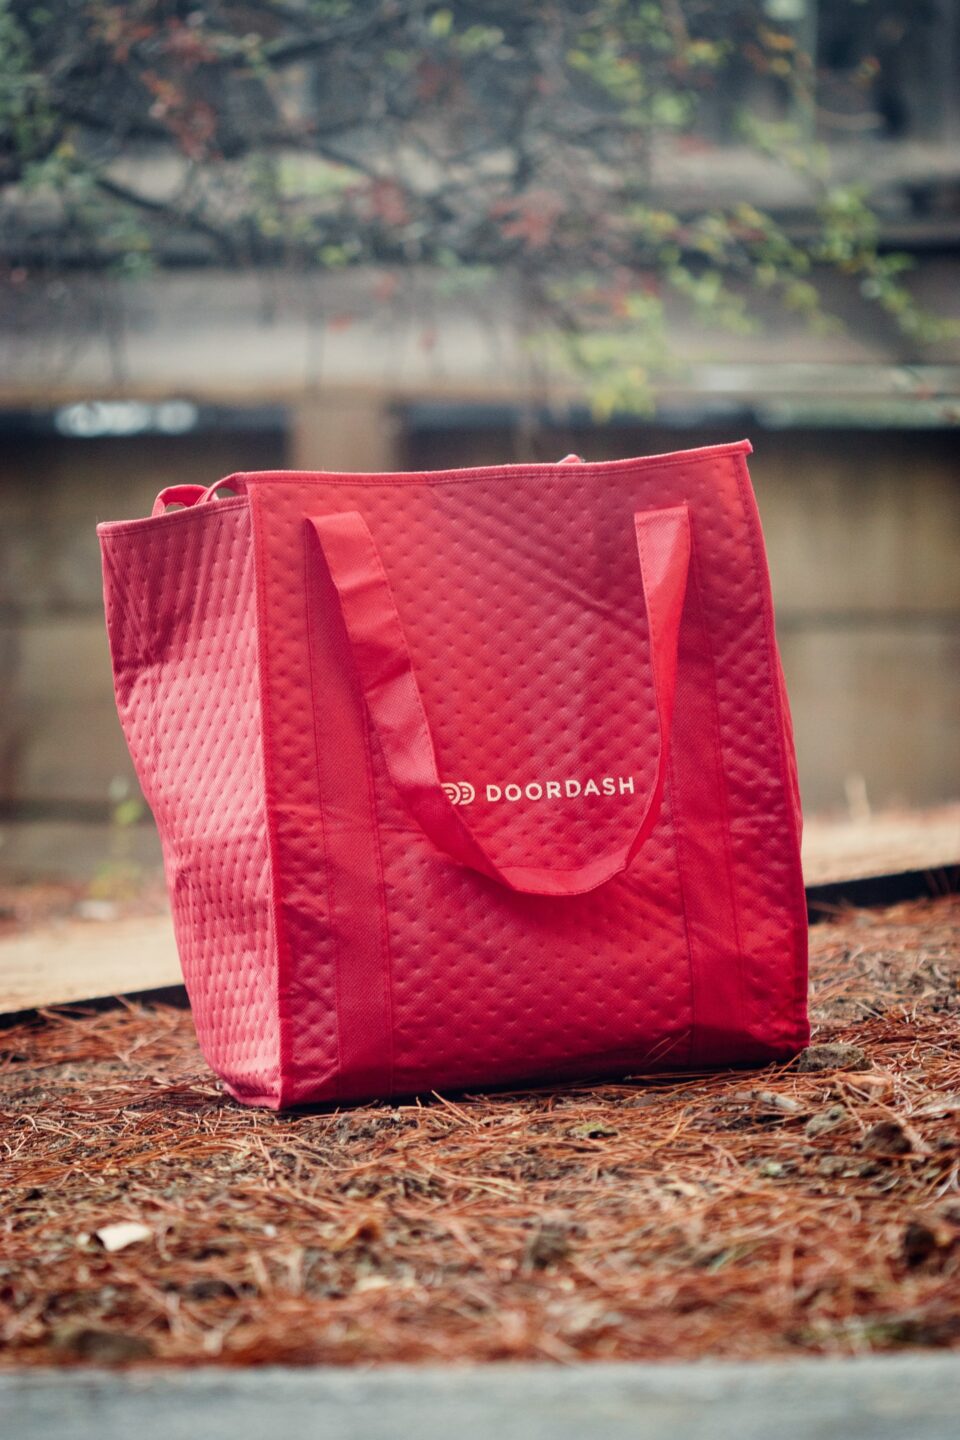 A DoorDash delivery bag sitting on the ground.